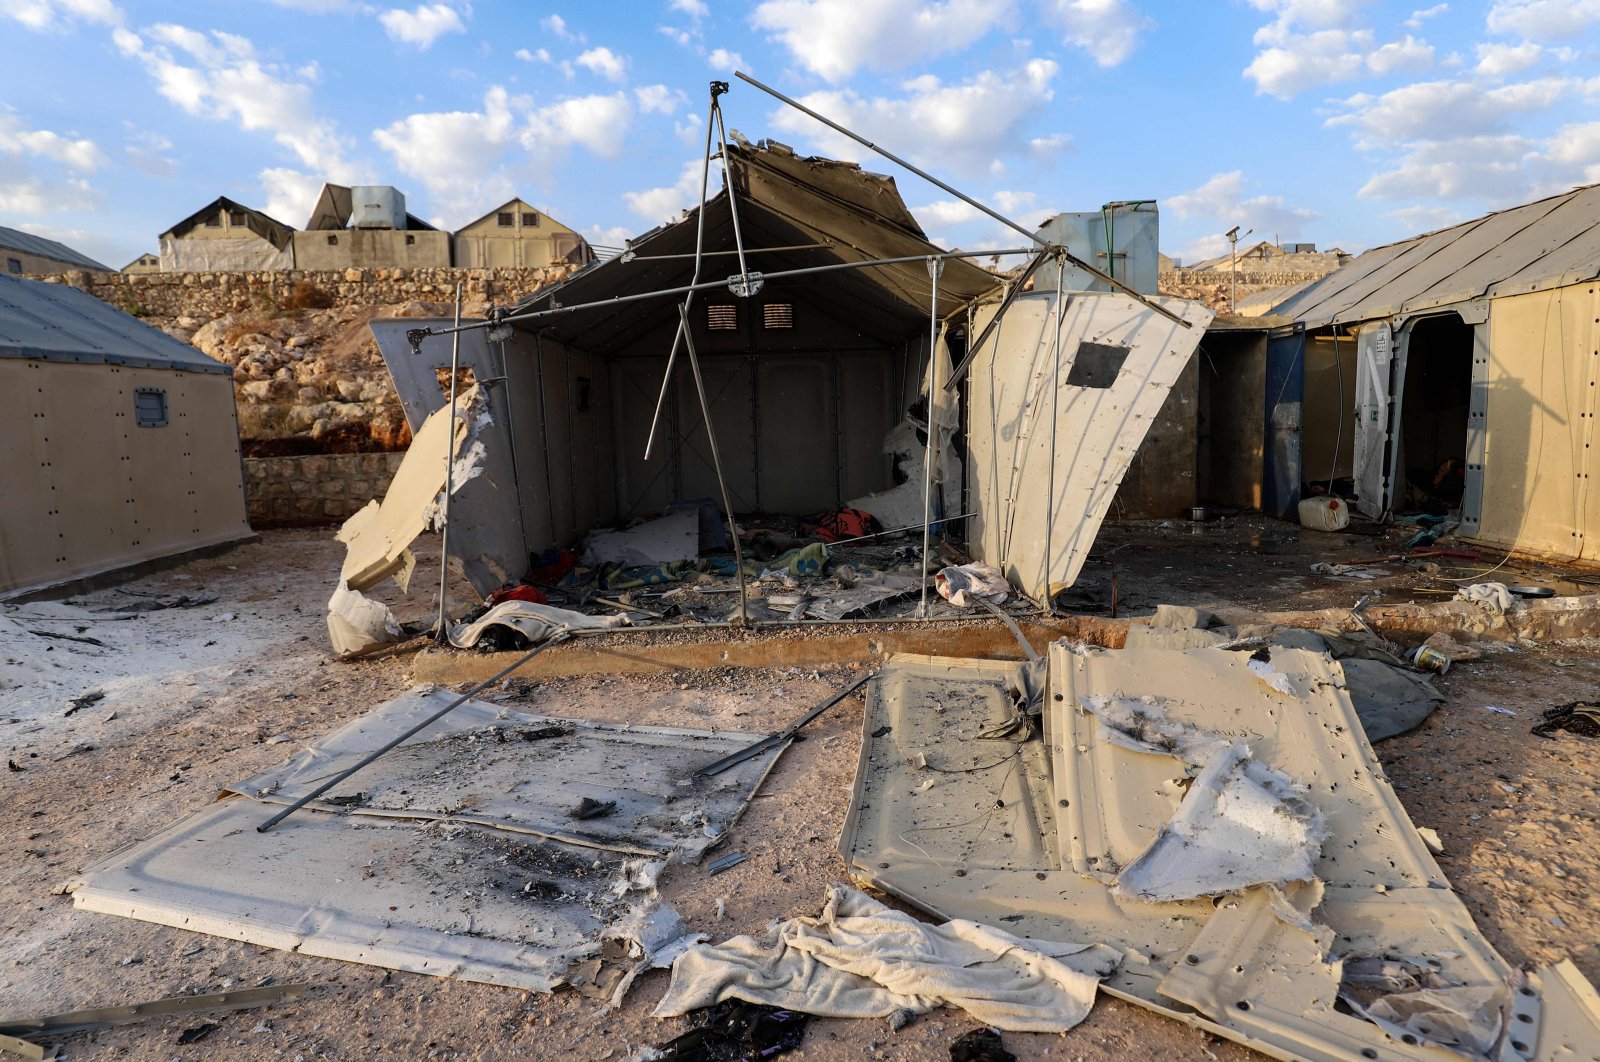 The damage caused by regime shelling on the camp of Maram for internally displaced people near the village of Kafr Jales in Syria&#039;s northwestern Idlib province, Nov. 6, 2022 (AFP Photo)